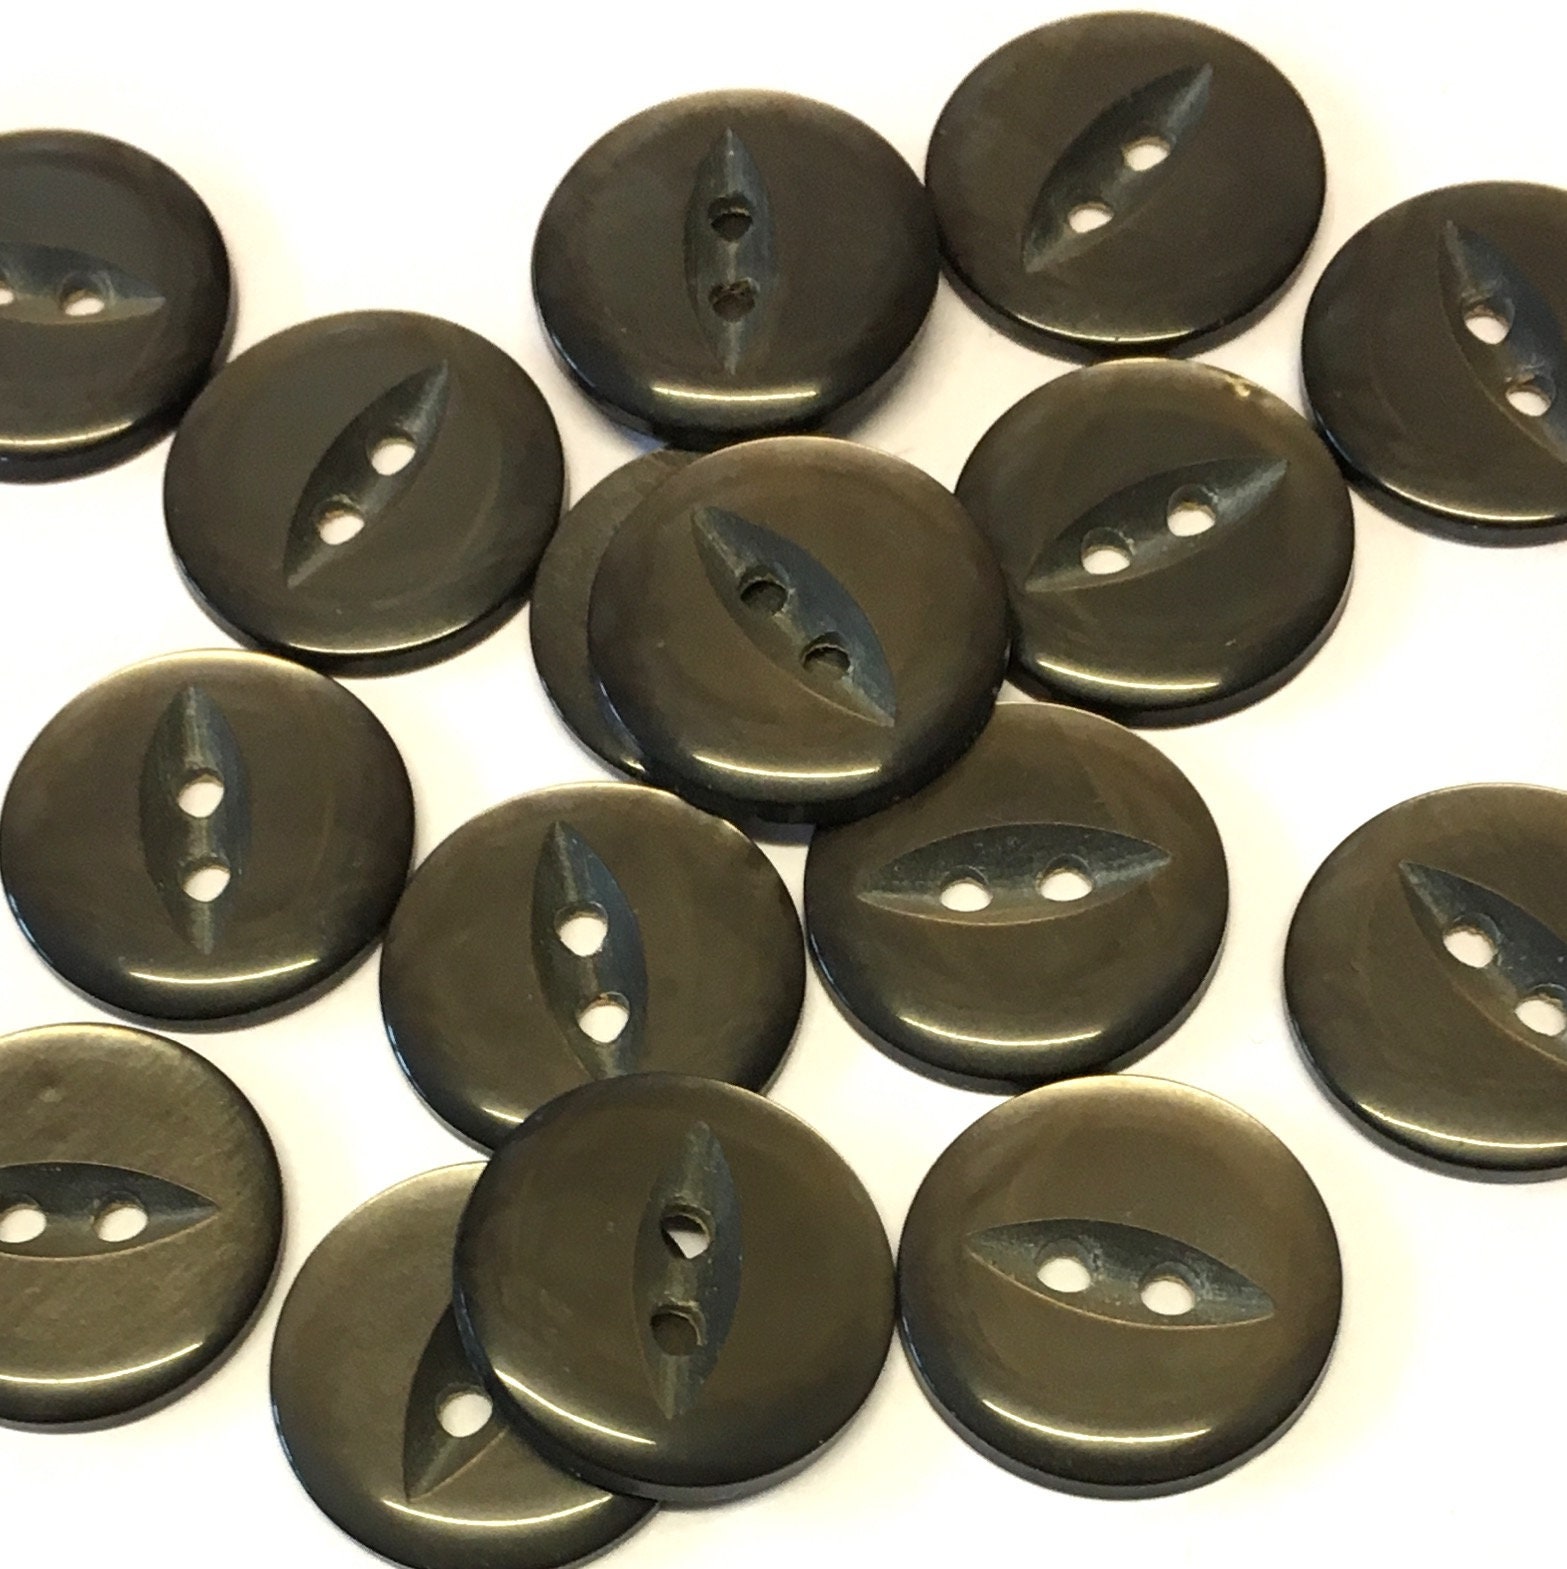 2, 32mm Large Round Metal Buttons With Two Holes, Bronze Metal